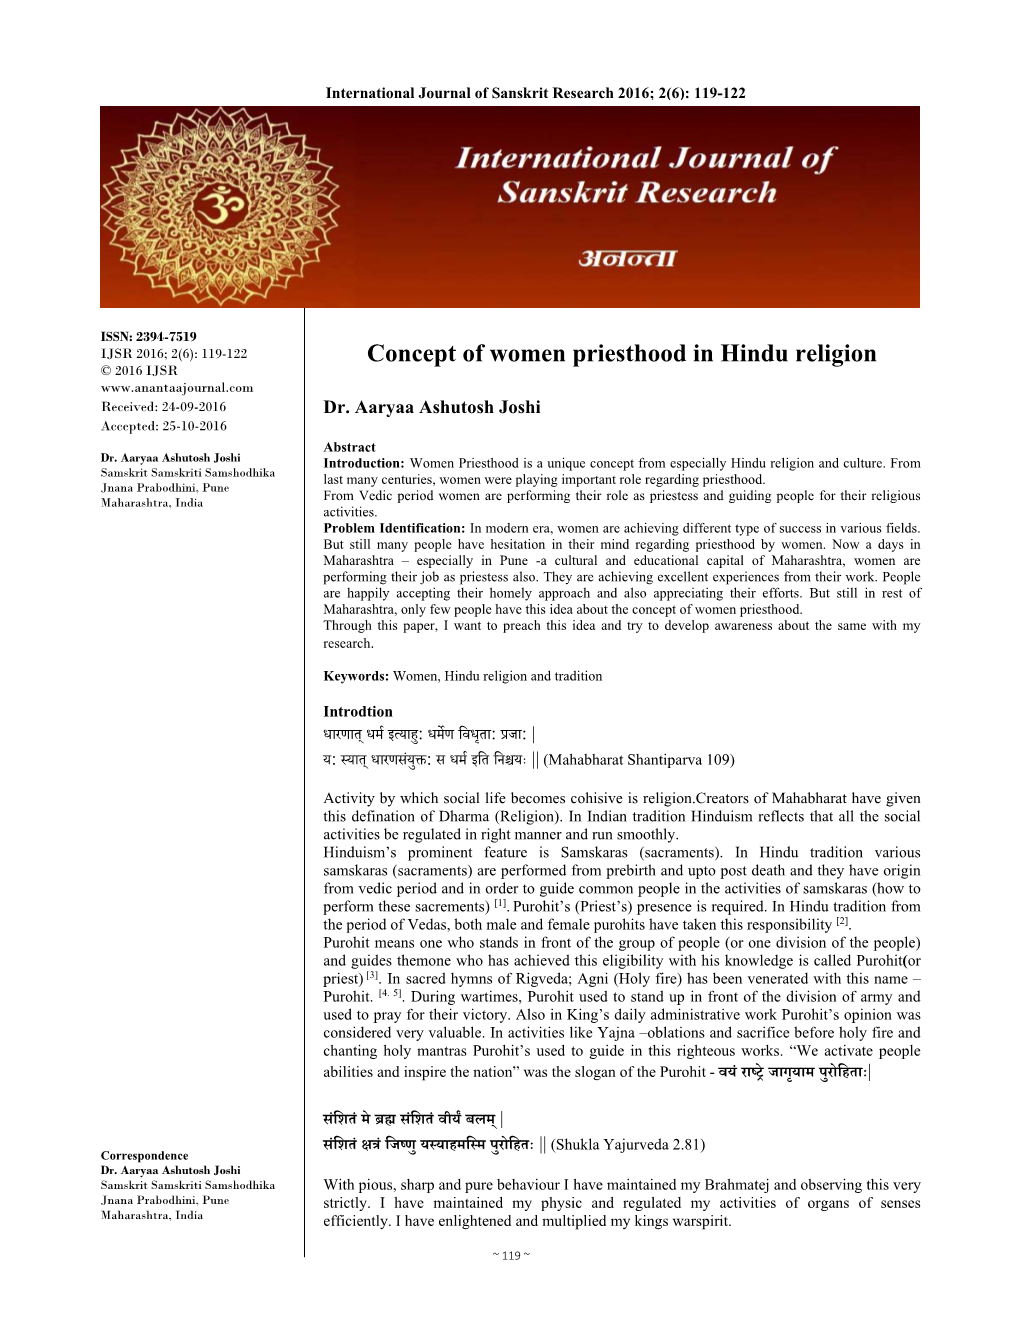 Concept of Women Priesthood in Hindu Religion © 2016 IJSR Received: 24-09-2016 Dr